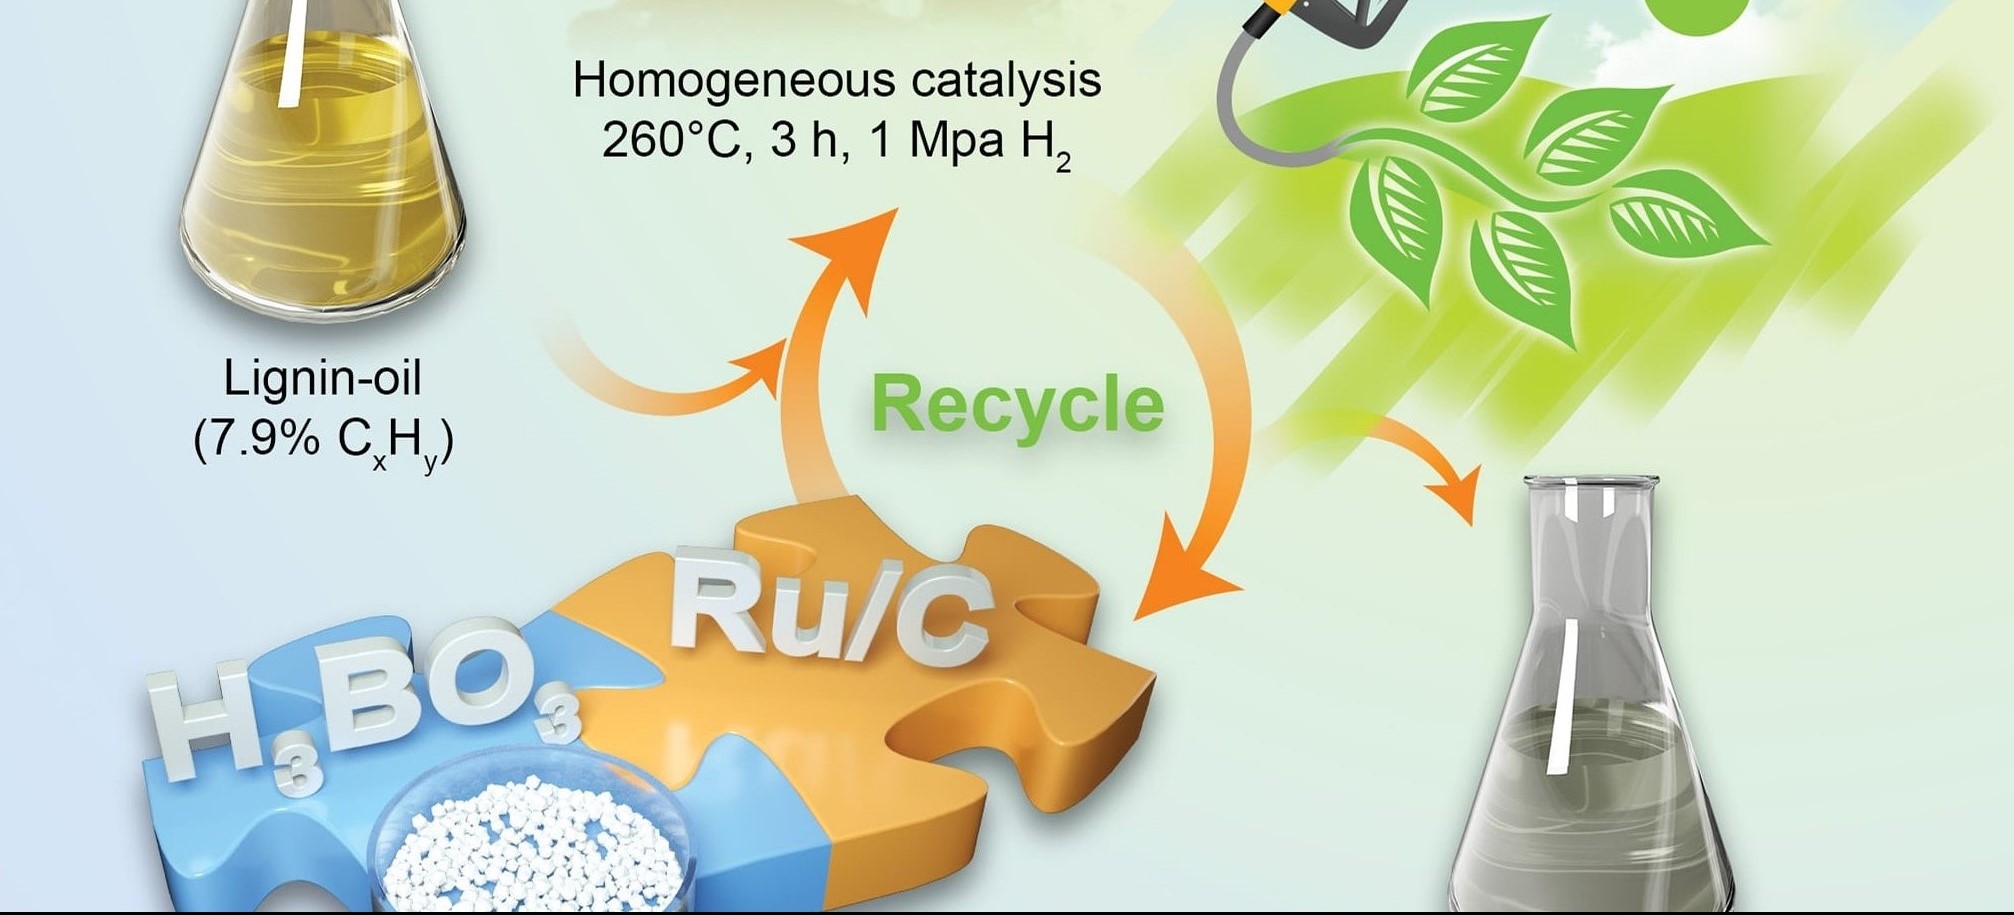 LetPub Journal Cover Art Design - Boric Acid as a Novel Homogeneous Catalyst Coupled with Ru/C for Hydrodeoxygenation of Phenolic Compounds and Raw Lignin Oil